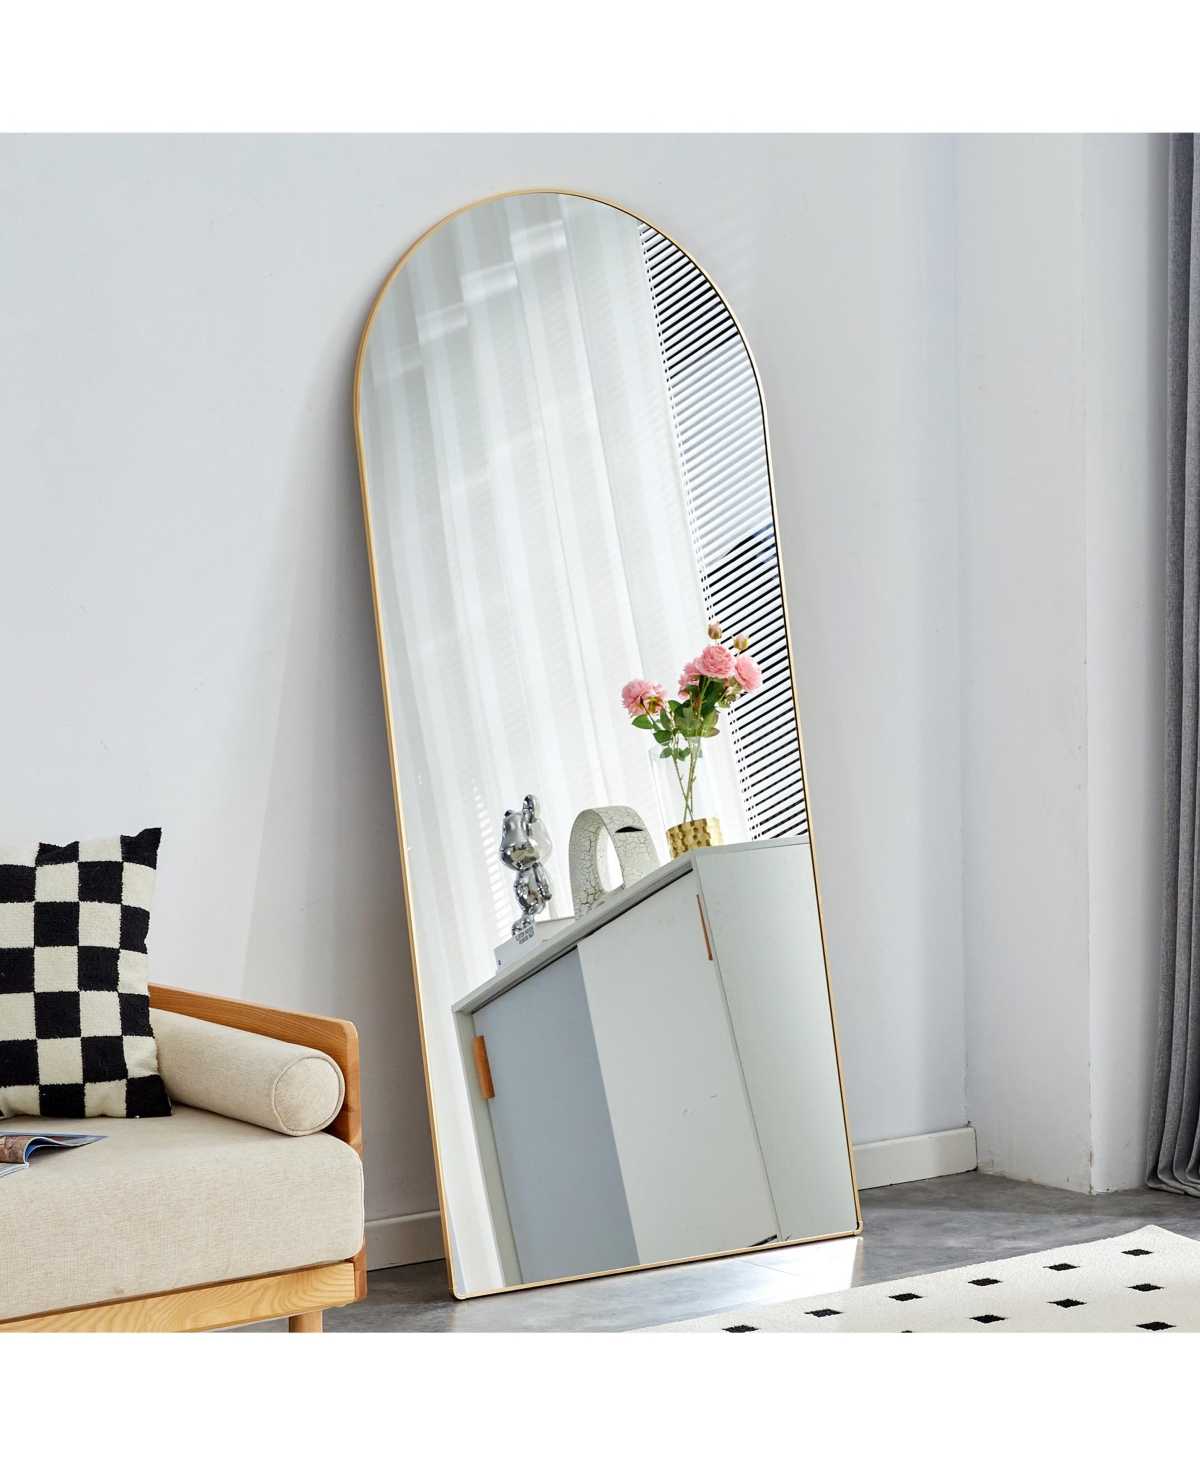 Floor Standing Full-Length Rearview Mirror. Metal Framed Arched Wall Mirror, Bathroom Makeup Mirror, Floor Standing Mirror With Bracket. 7